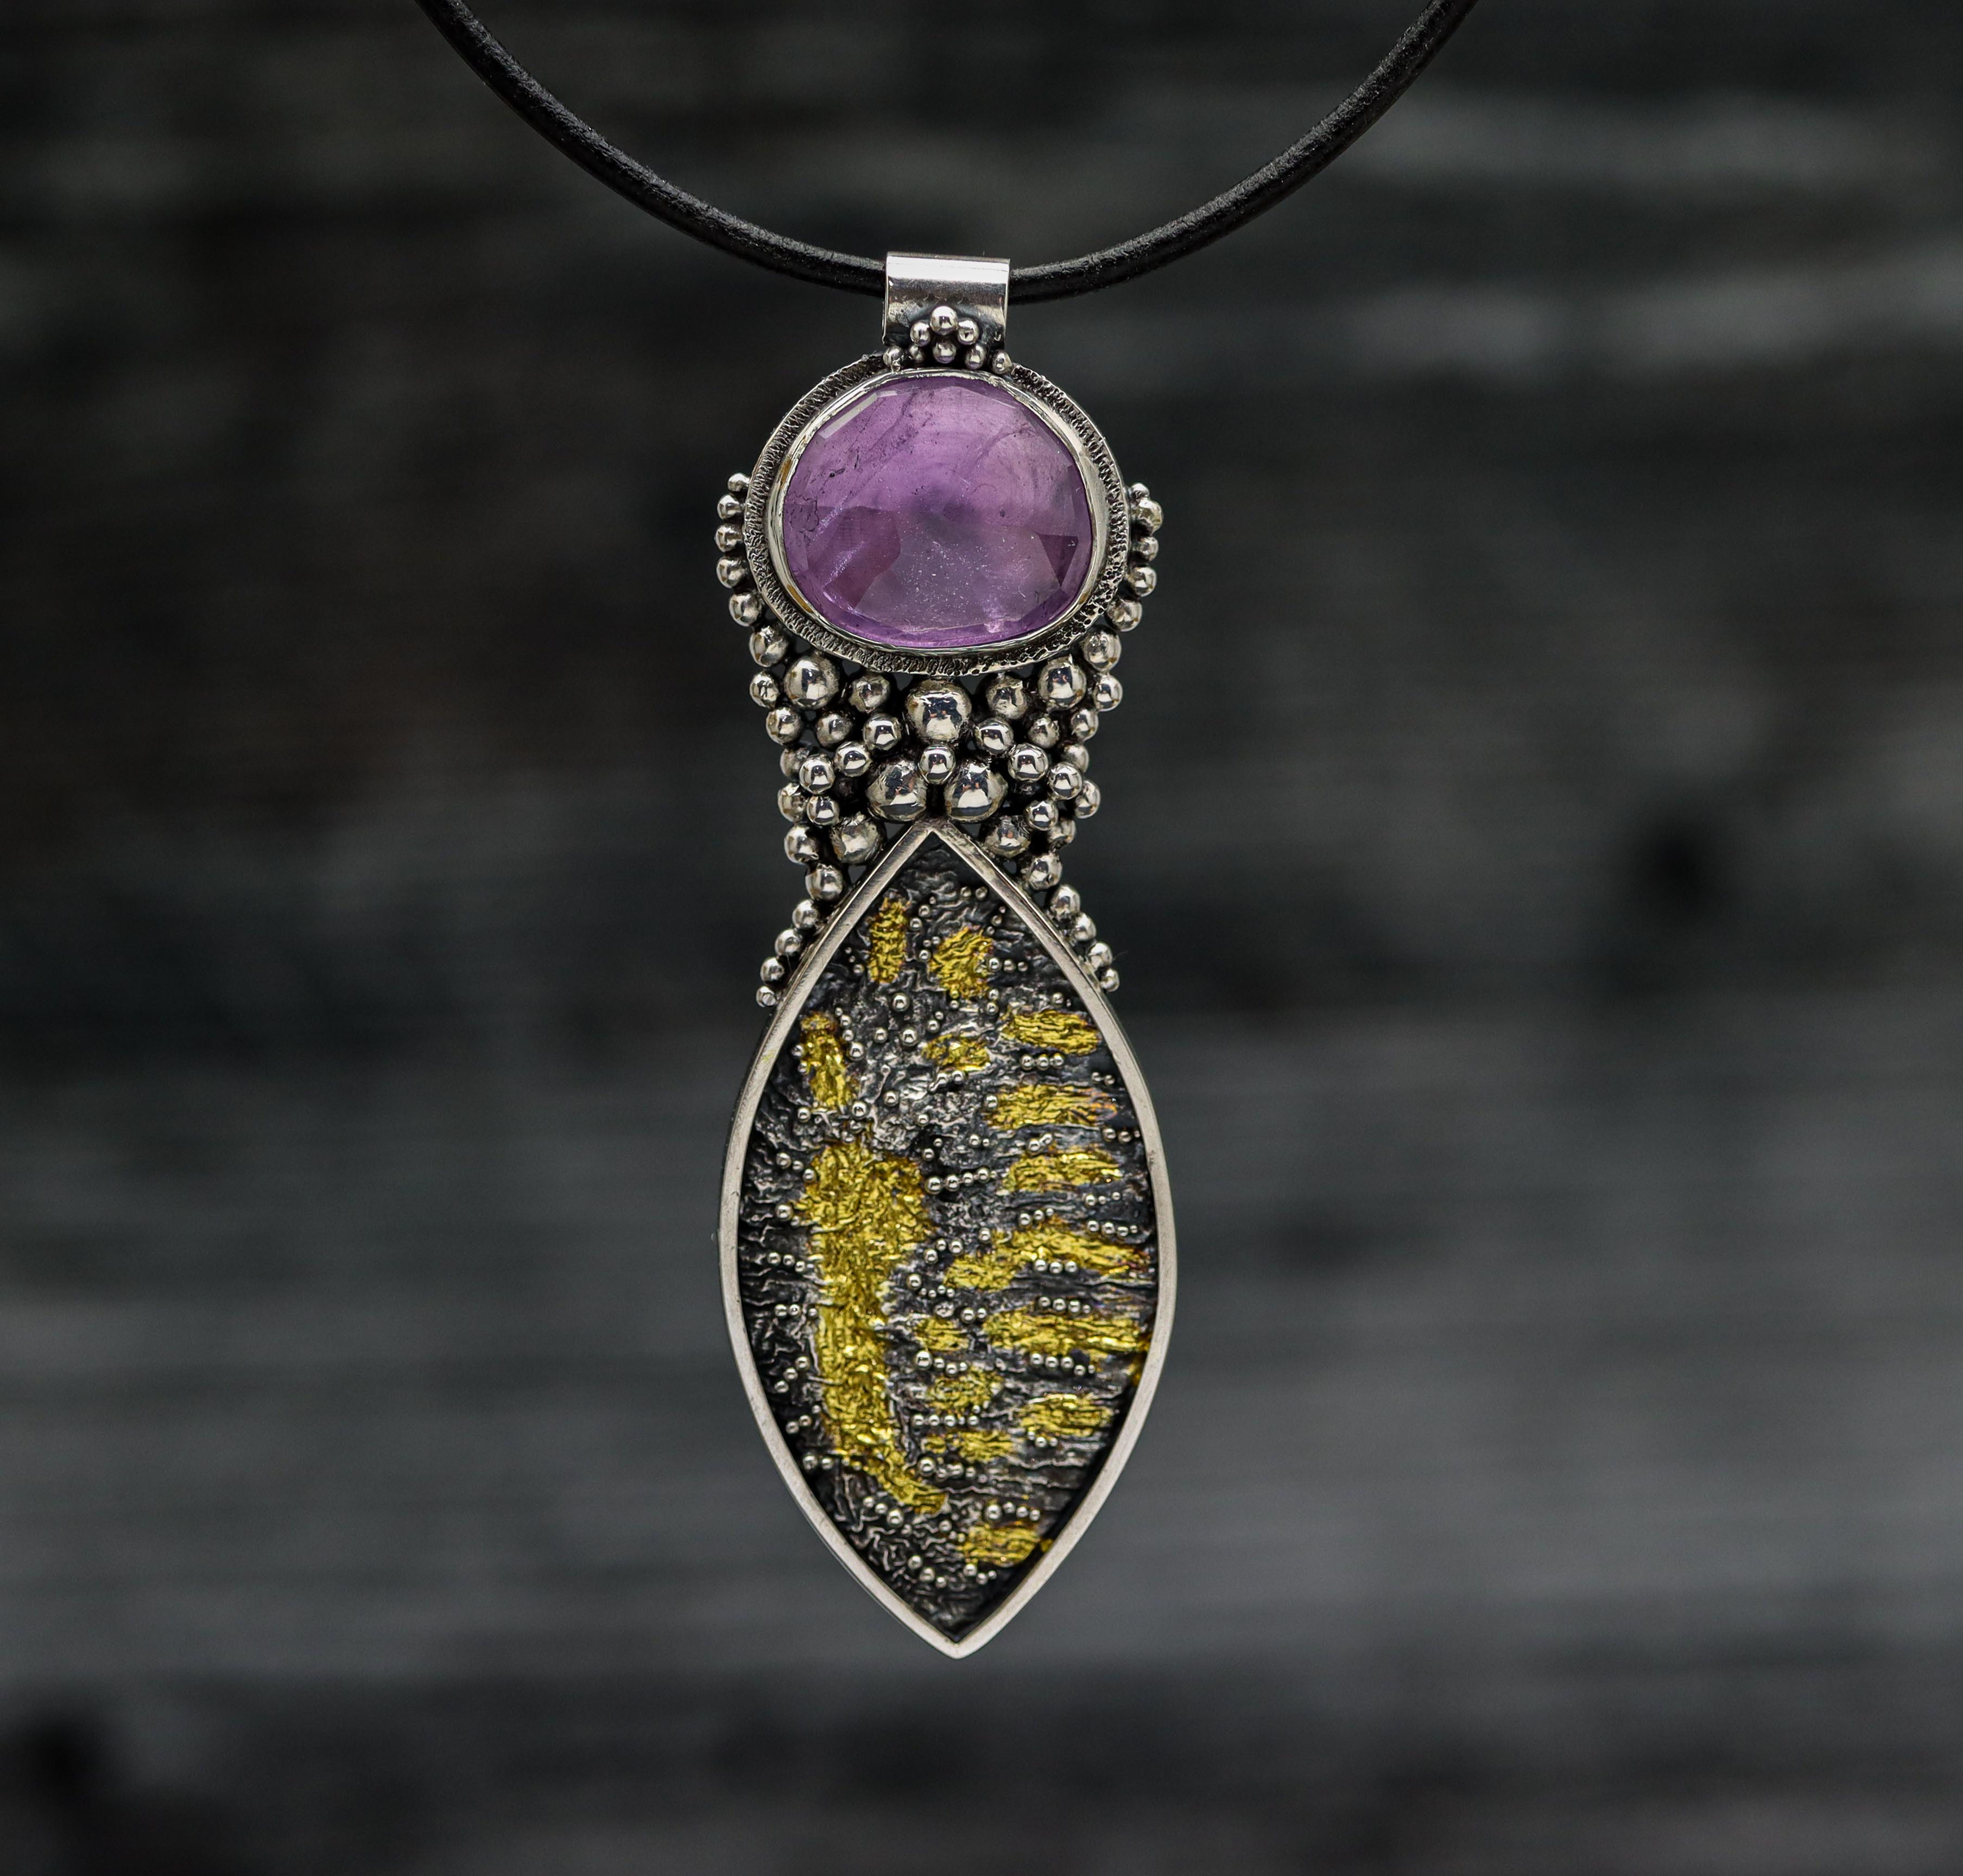 The Goddess Pendant #3 Obsidian Necklace Sterling Silver and 22k Gold